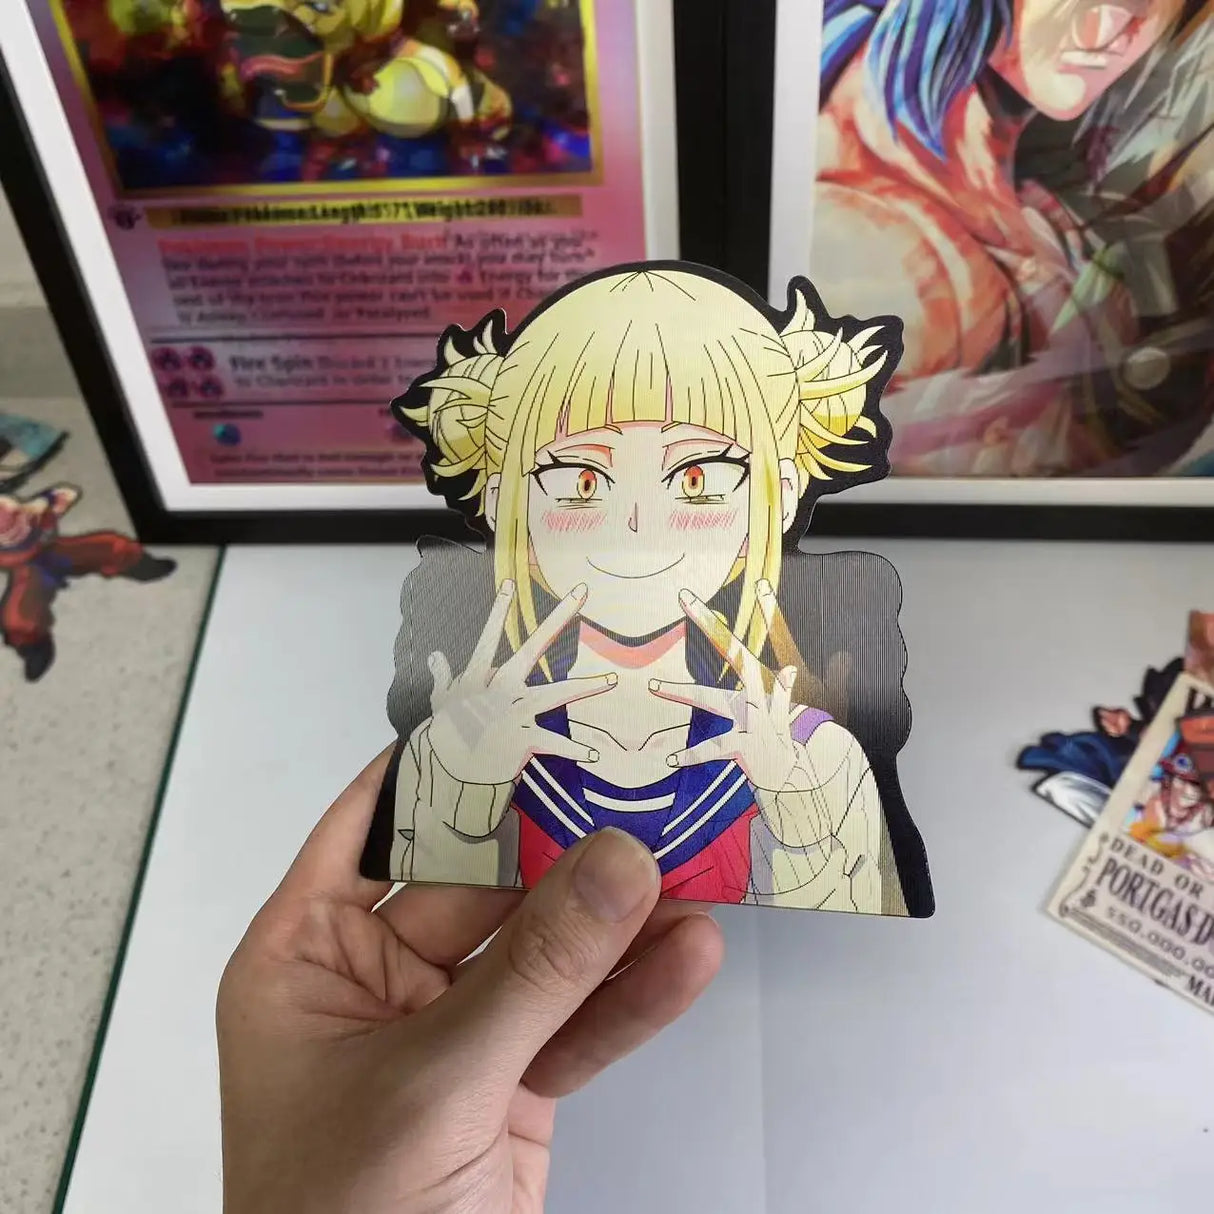 Each sticker shows to depict Himiko in motion, creating a immersive visual effect. If you are looking for more Academia Merch, We have it all! | Check out all our Anime Merch now!